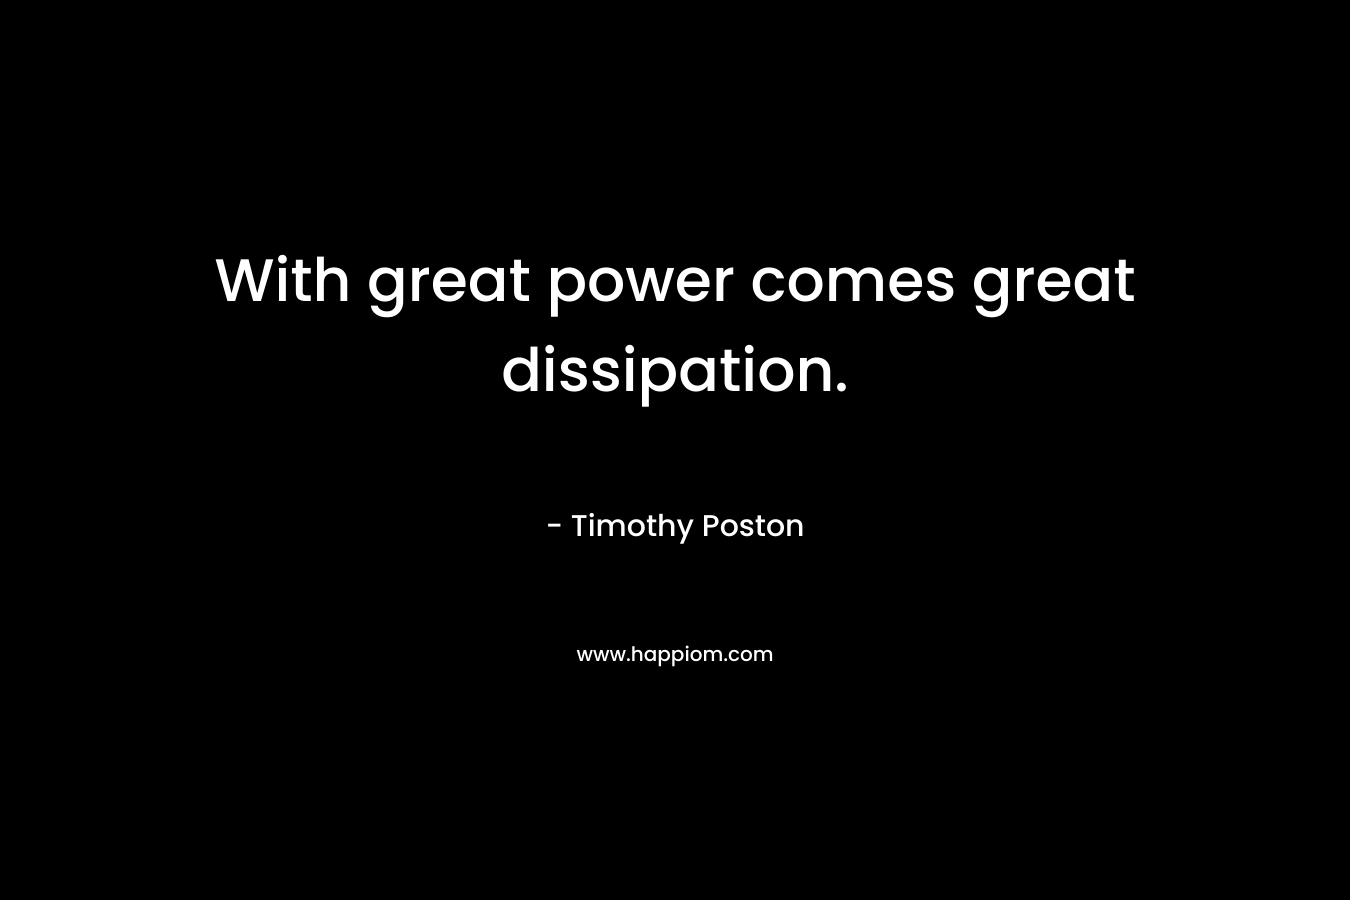 With great power comes great dissipation.